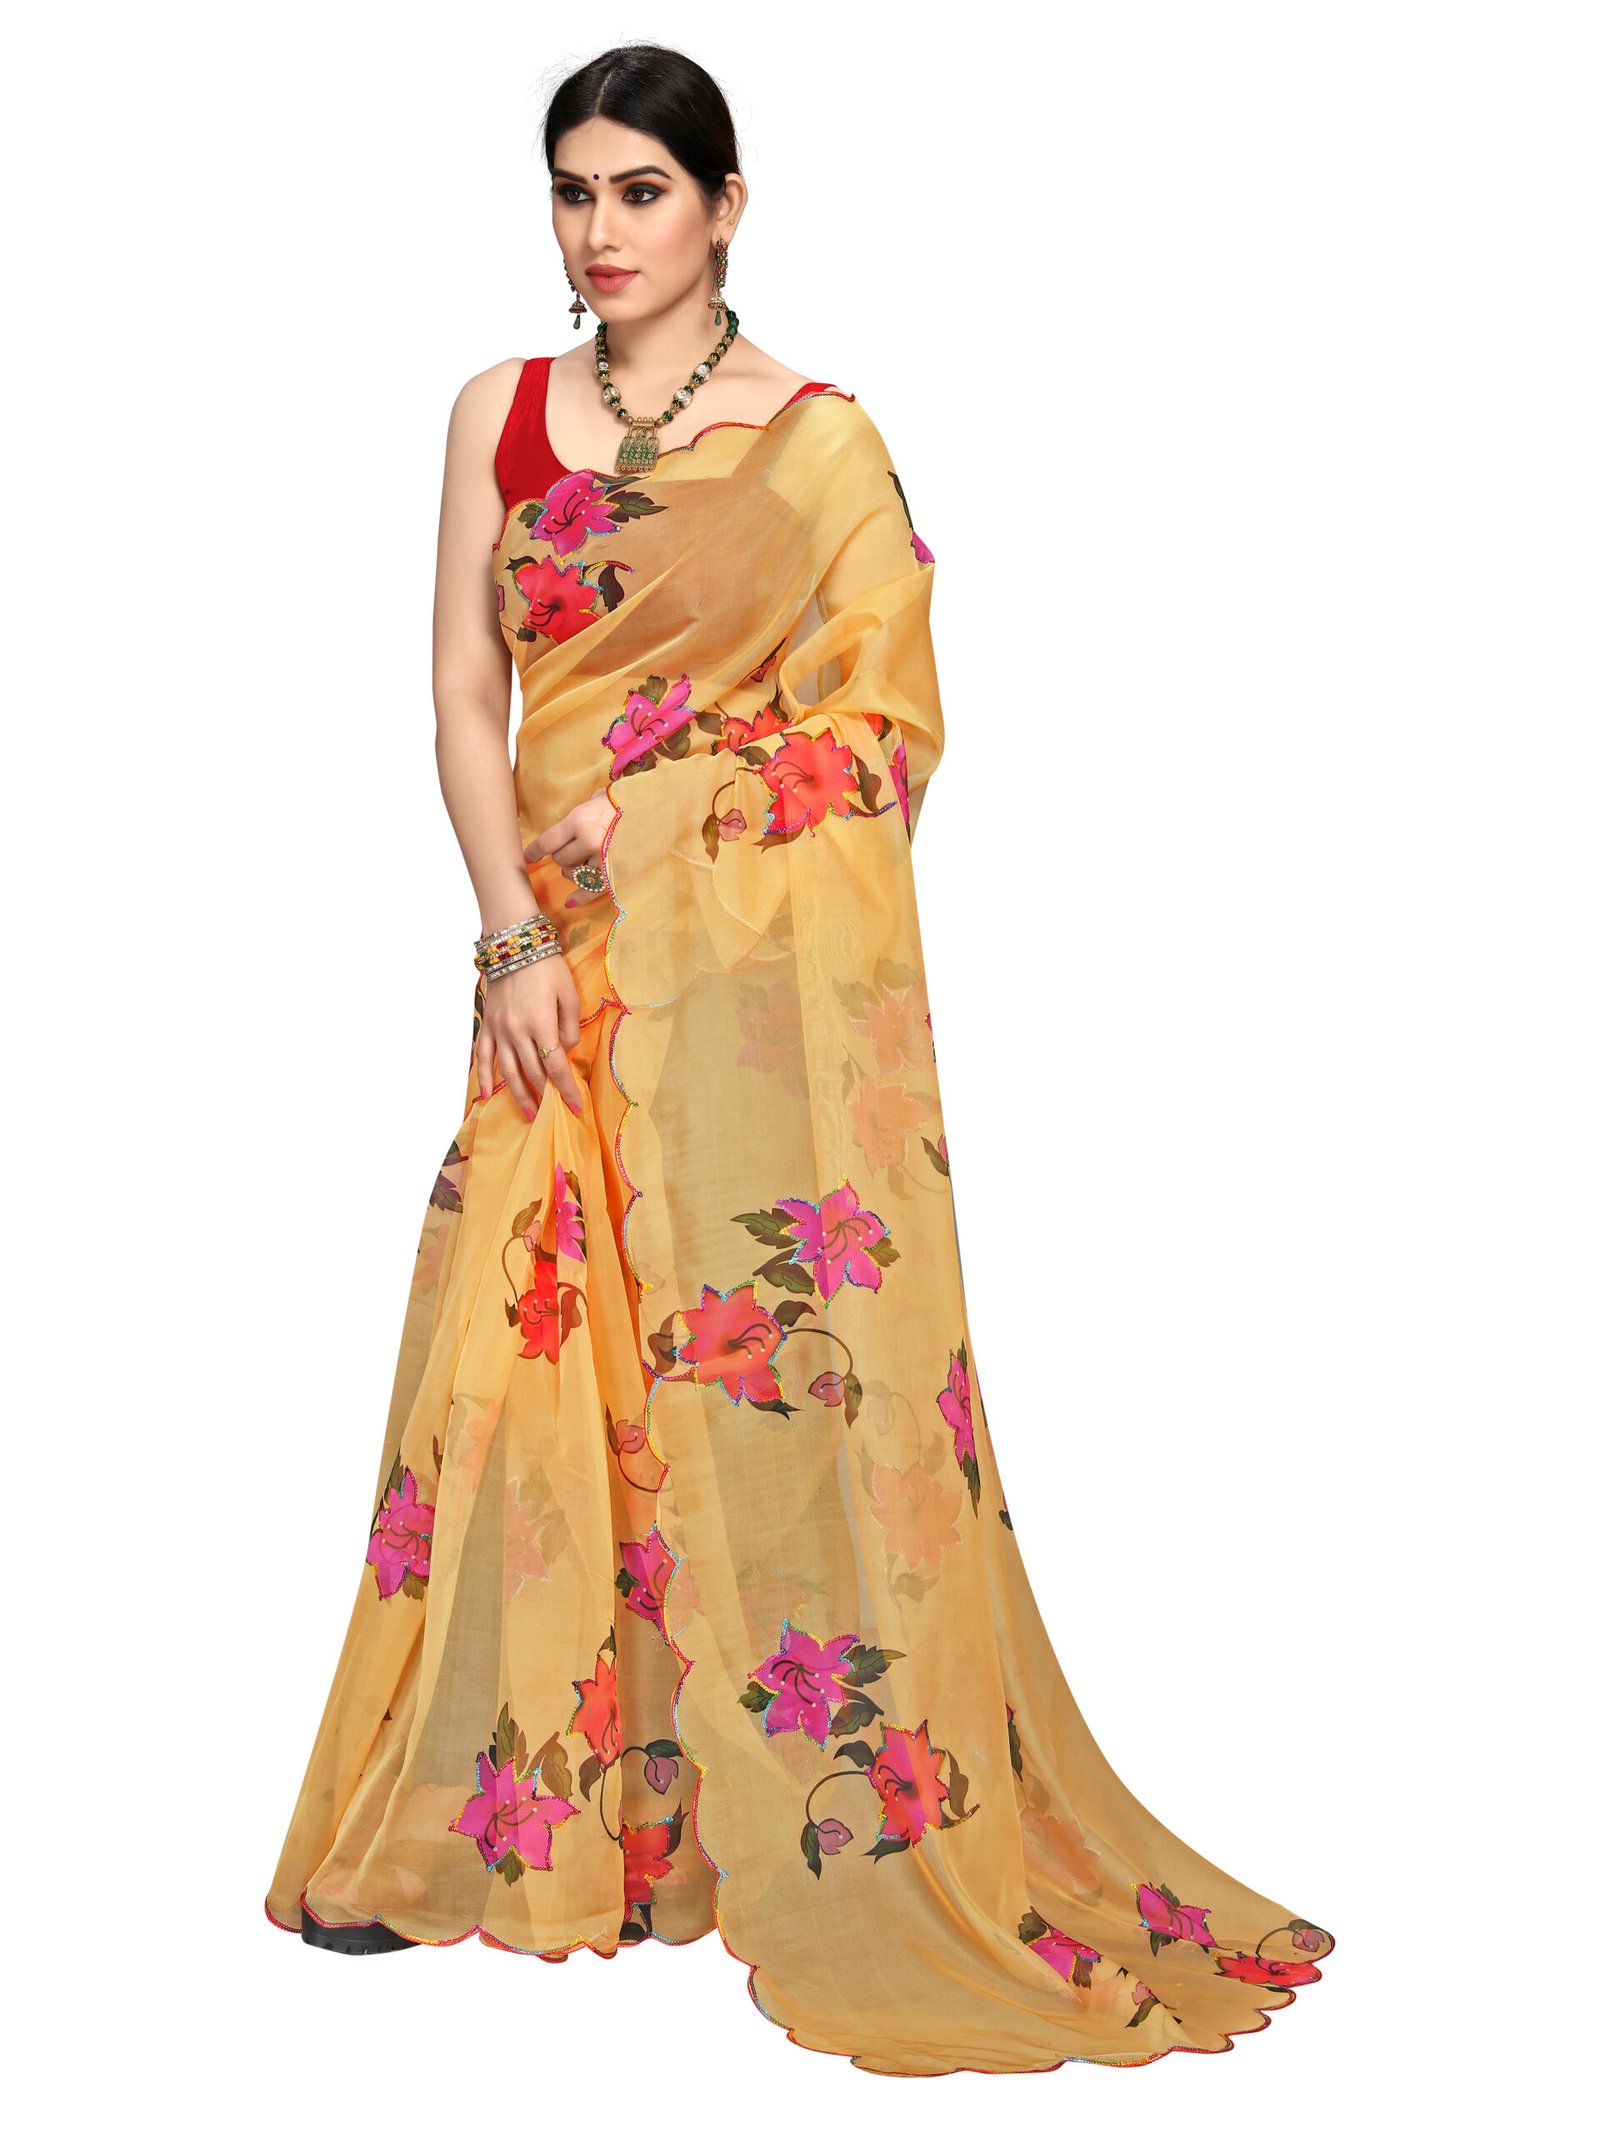 Meesho party wear saree review  Best party wear saree under 500